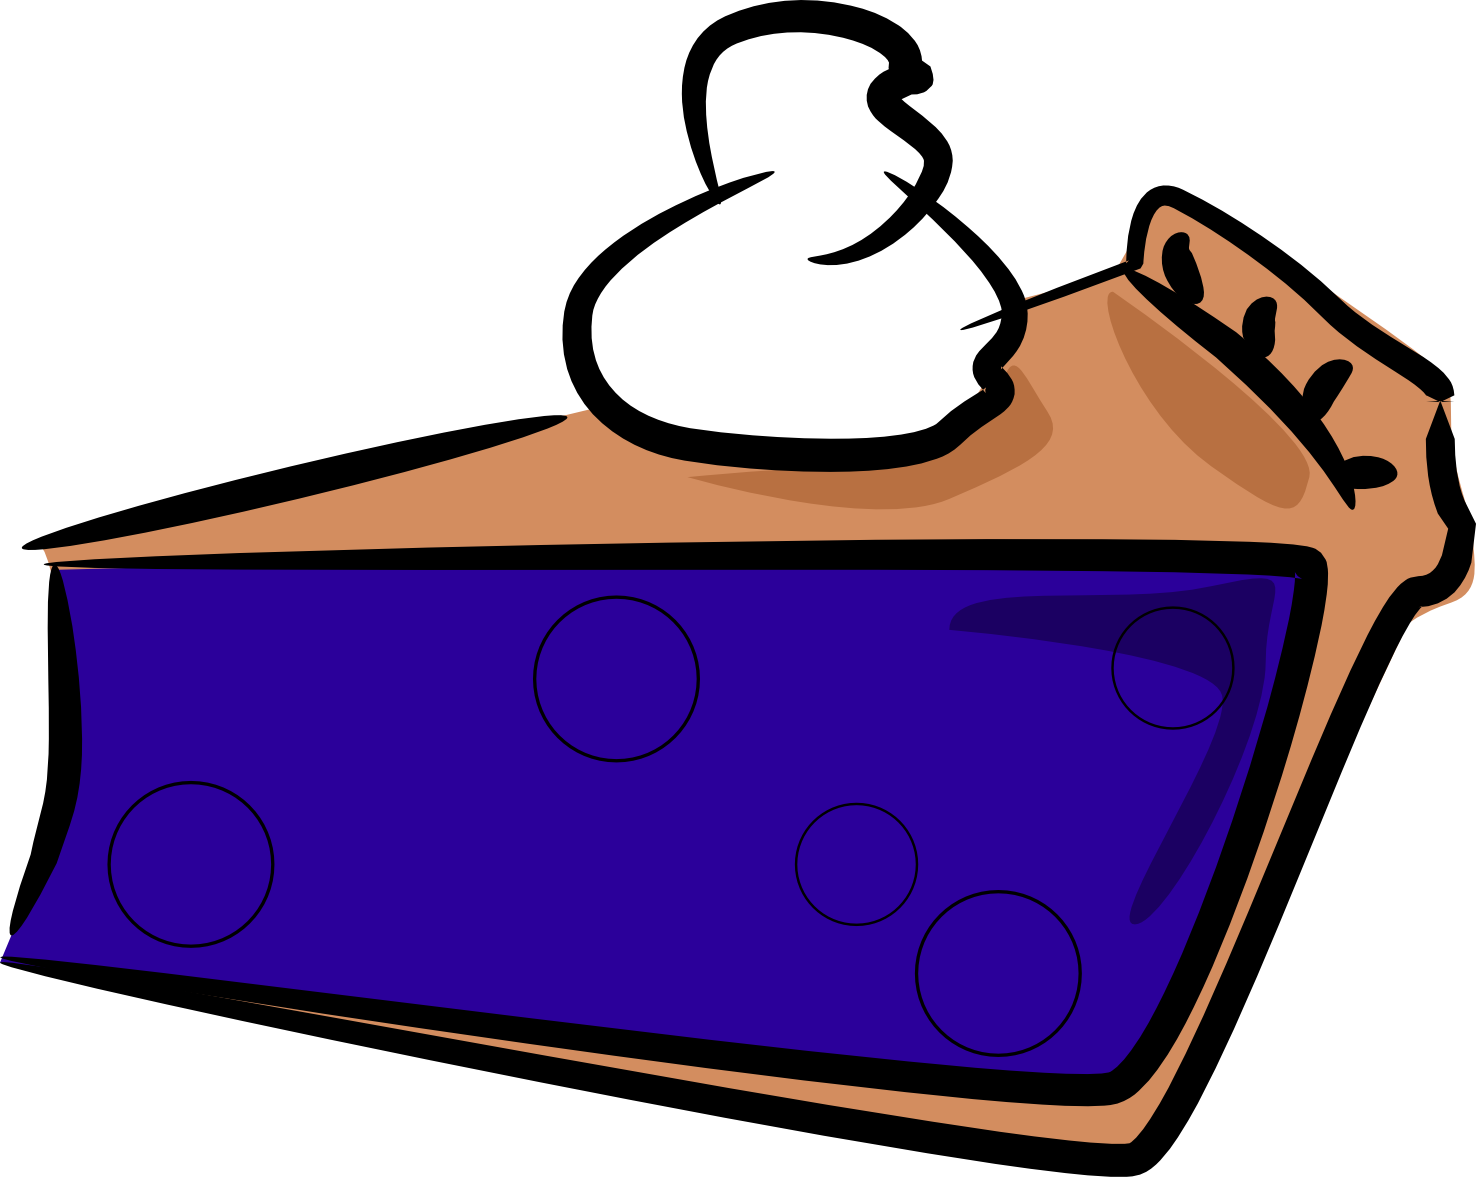 Pie The Image Png Clipart